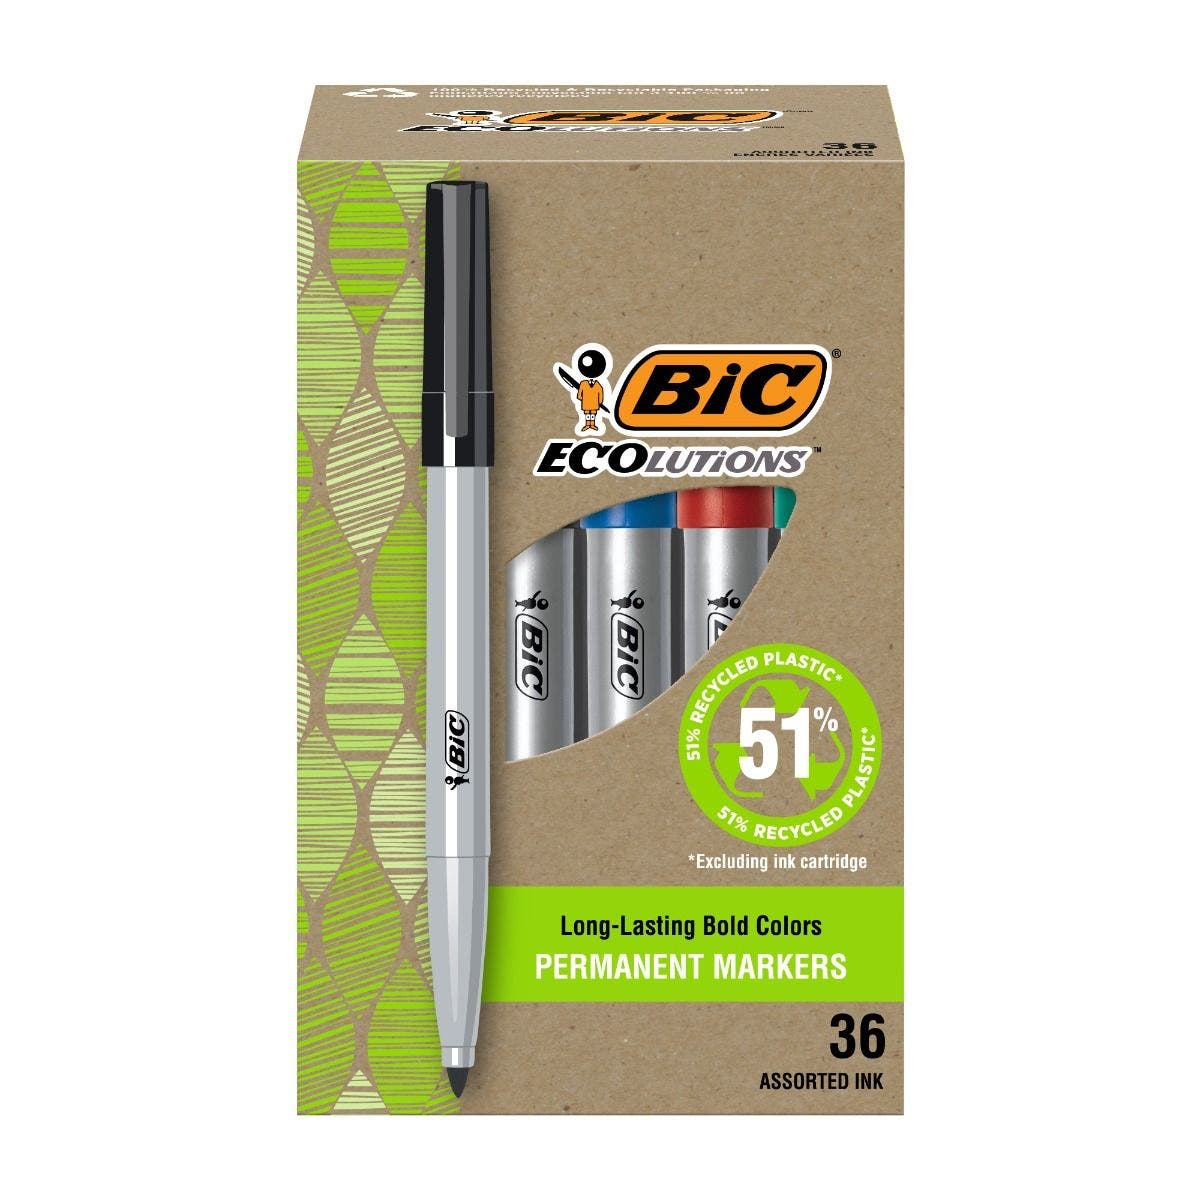 BIC Permanent Markers - Discover our range of Permanant Bic markers